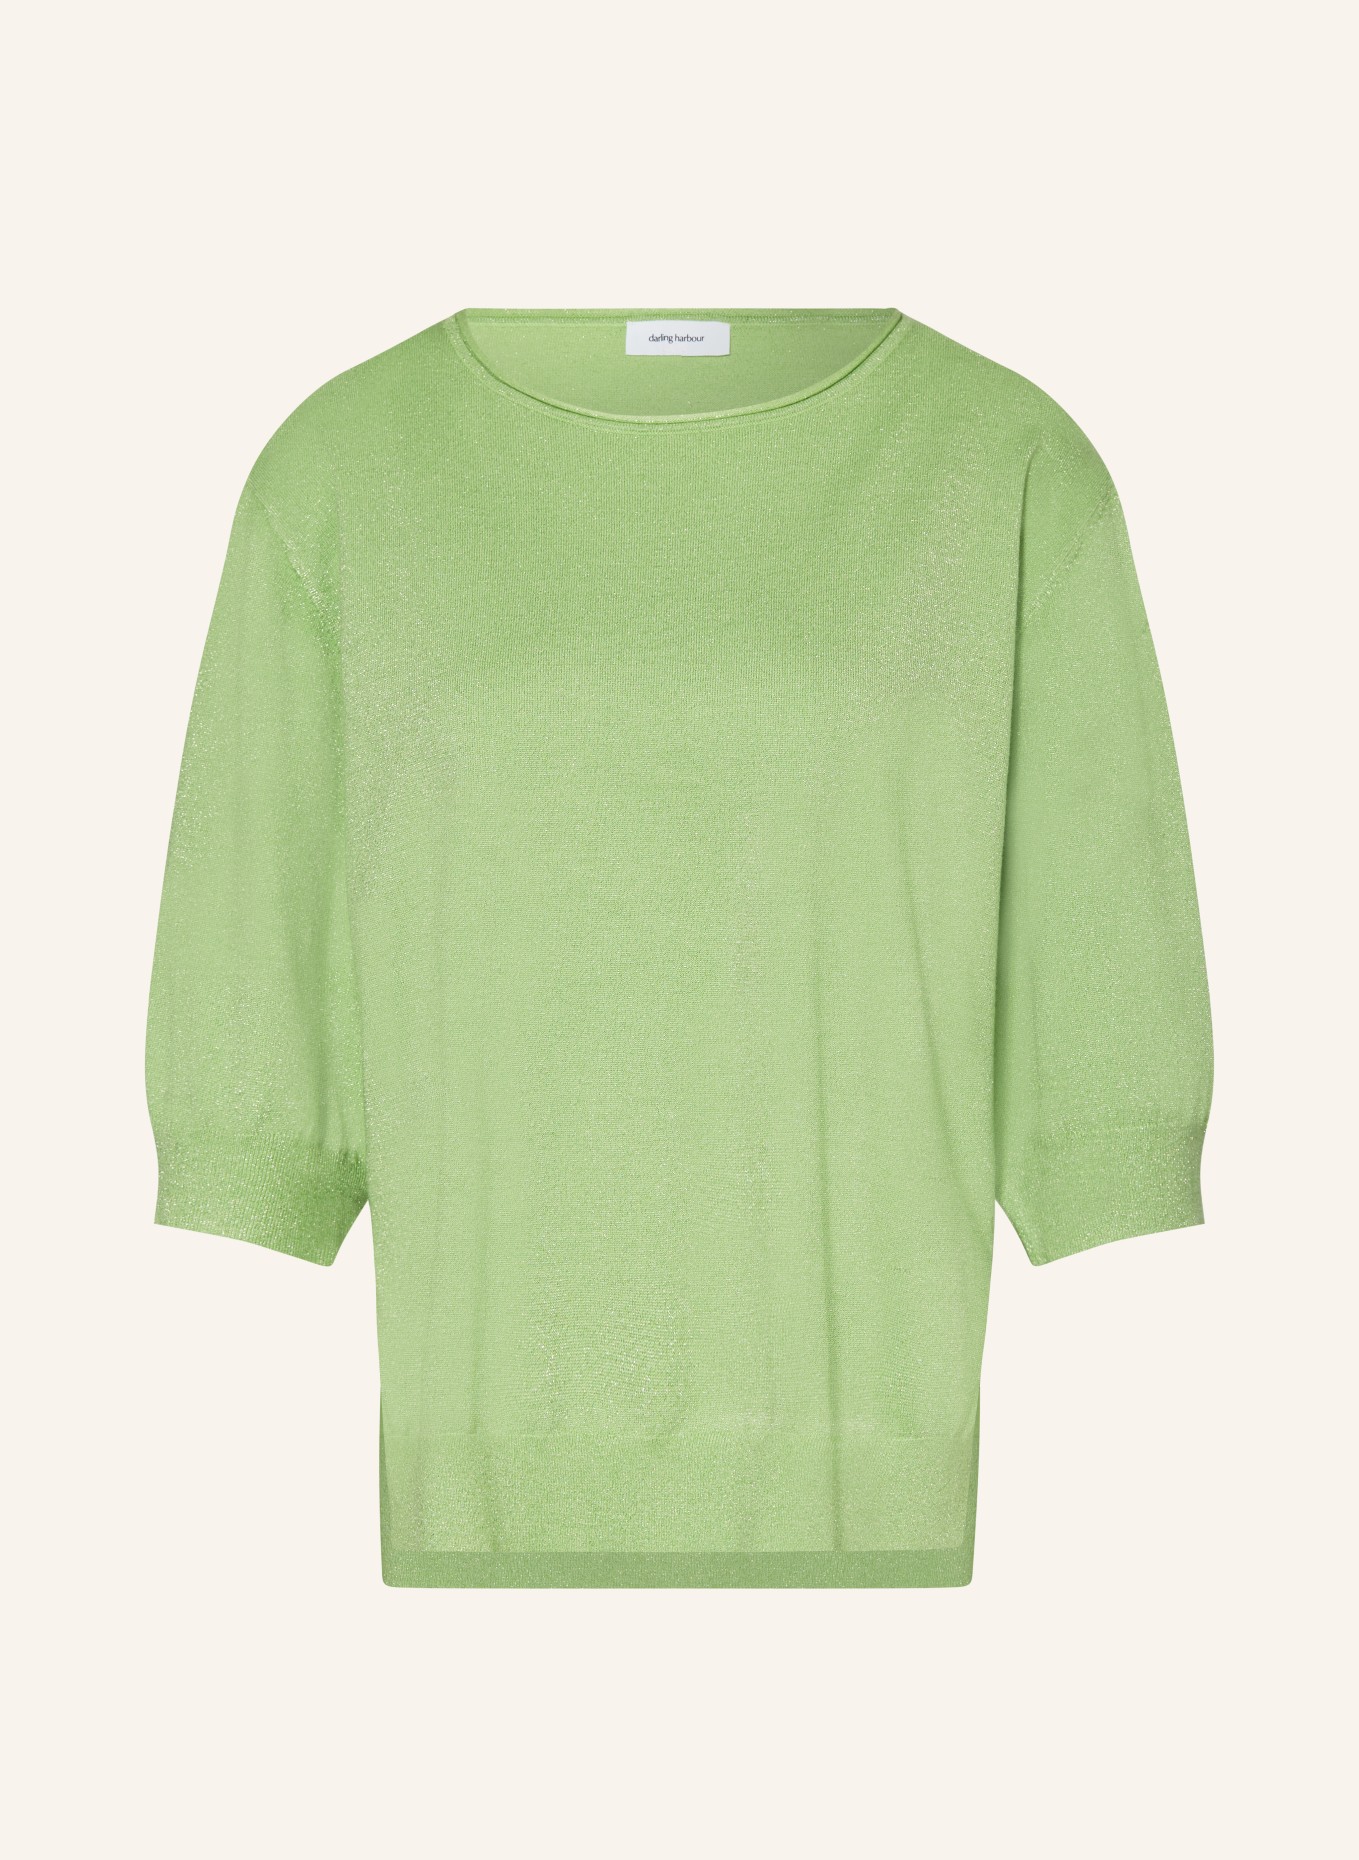 darling harbour Sweater with 3/4 sleeves and glitter thread, Color: LIGHT GREEN (Image 1)